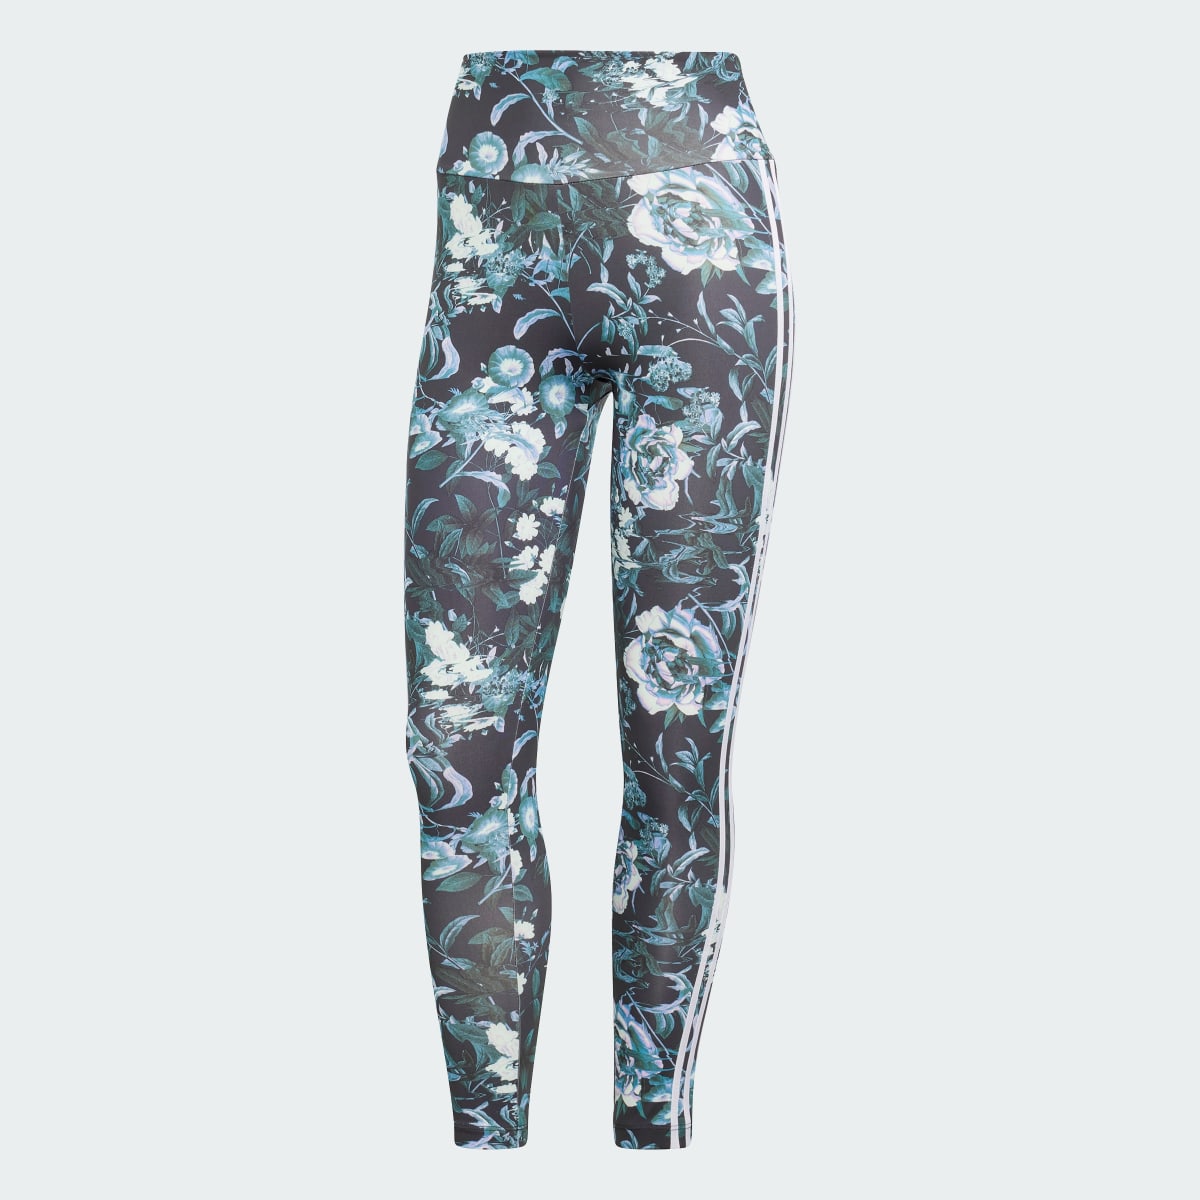 adidas Training all over floral print 7/8 leggings in black and pink | ASOS